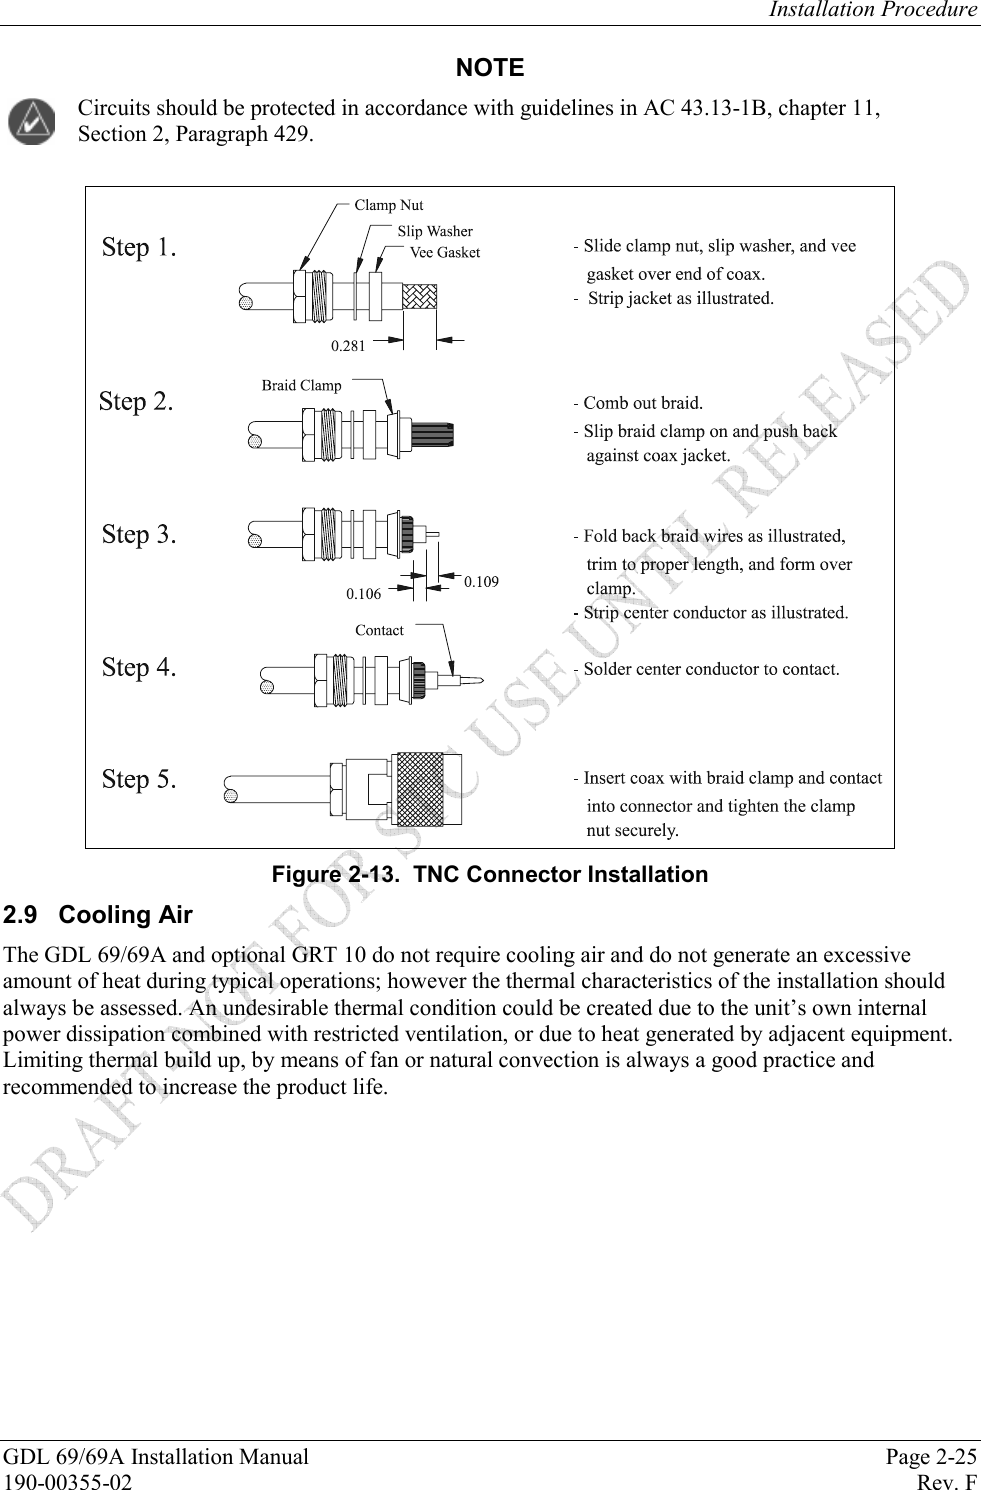 Installation Procedure GDL 69/69A Installation Manual  Page 2-25 190-00355-02   Rev. F NOTE Circuits should be protected in accordance with guidelines in AC 43.13-1B, chapter 11, Section 2, Paragraph 429.   Figure 2-13.  TNC Connector Installation 2.9 Cooling Air The GDL 69/69A and optional GRT 10 do not require cooling air and do not generate an excessive amount of heat during typical operations; however the thermal characteristics of the installation should always be assessed. An undesirable thermal condition could be created due to the unit’s own internal power dissipation combined with restricted ventilation, or due to heat generated by adjacent equipment. Limiting thermal build up, by means of fan or natural convection is always a good practice and recommended to increase the product life.  